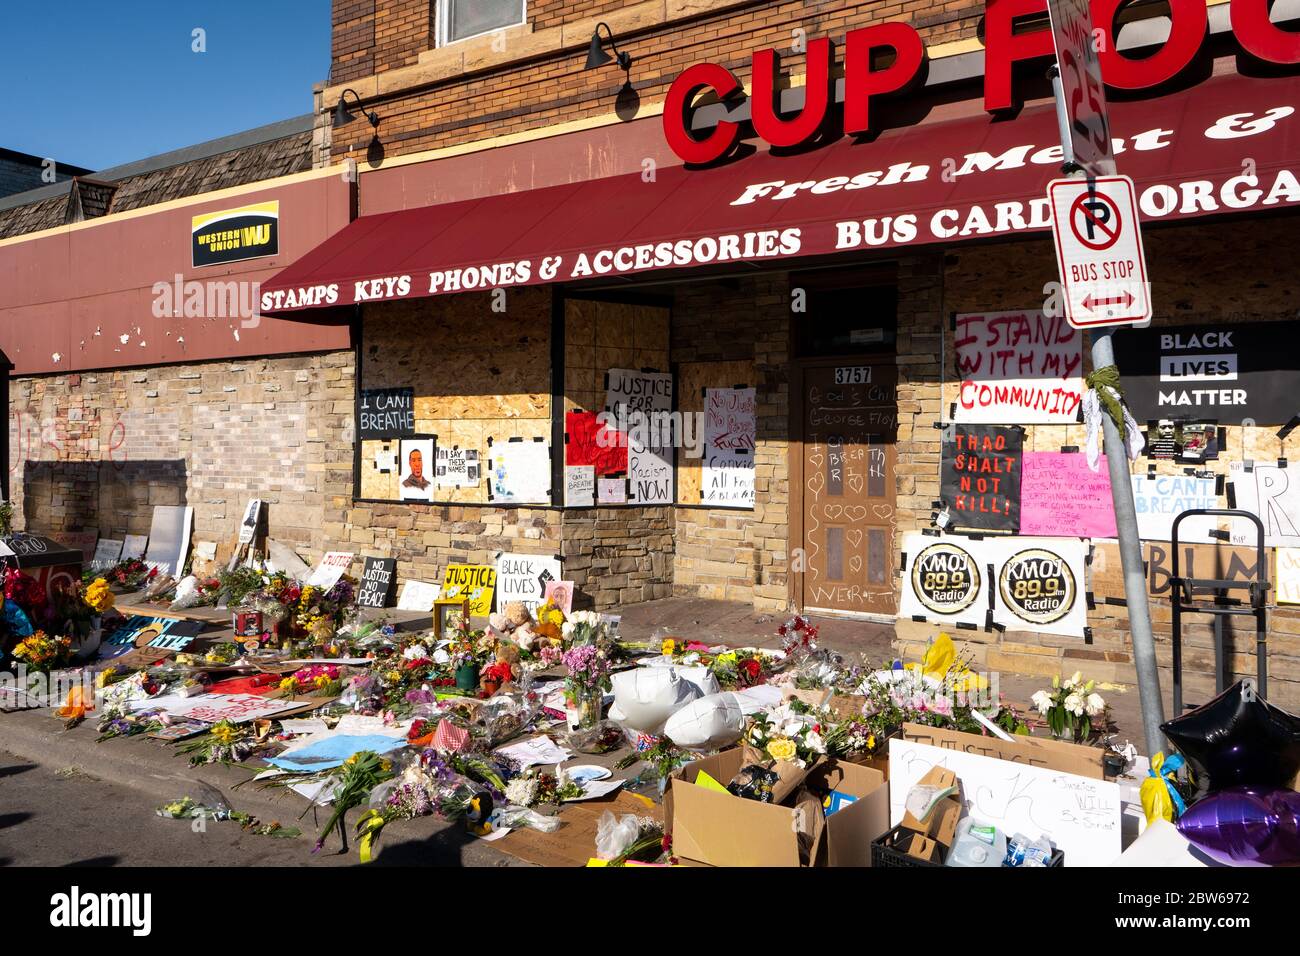 cup foods george floyd memorial honoring black lives matter in minneapolis riots Stock Photo